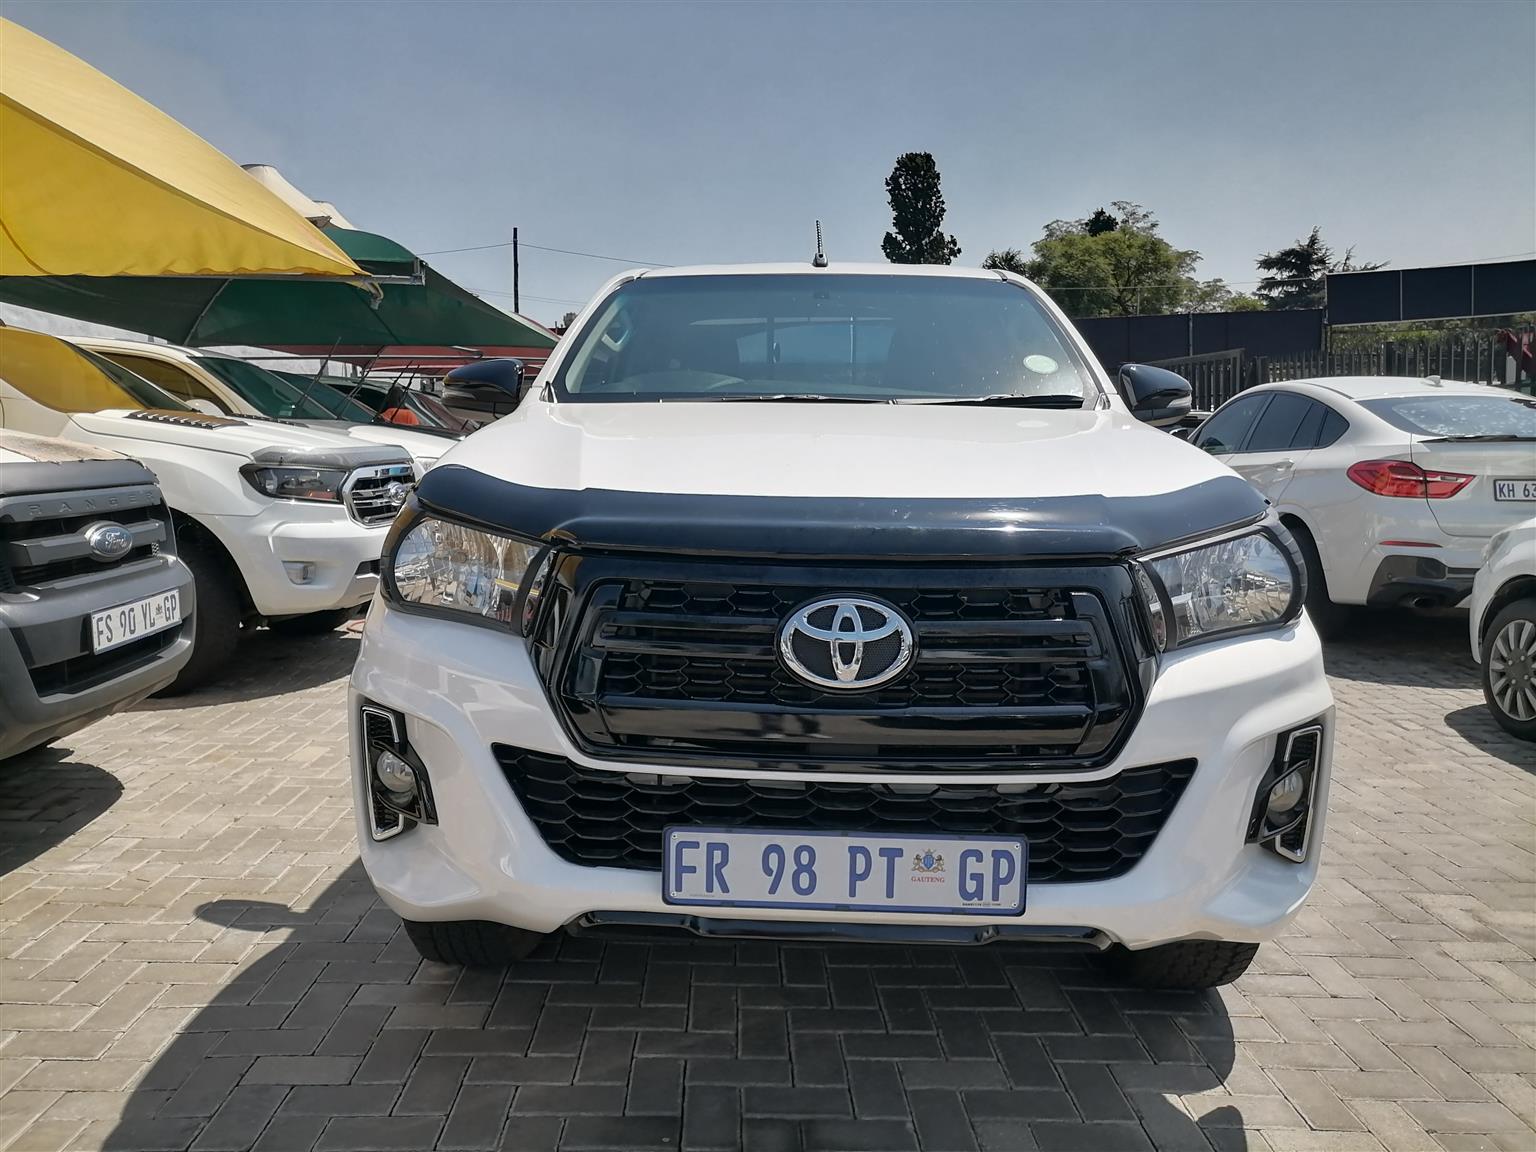 2017 Toyota Hilux 2.4GD-6 Extra cab SRX Manual For Sale